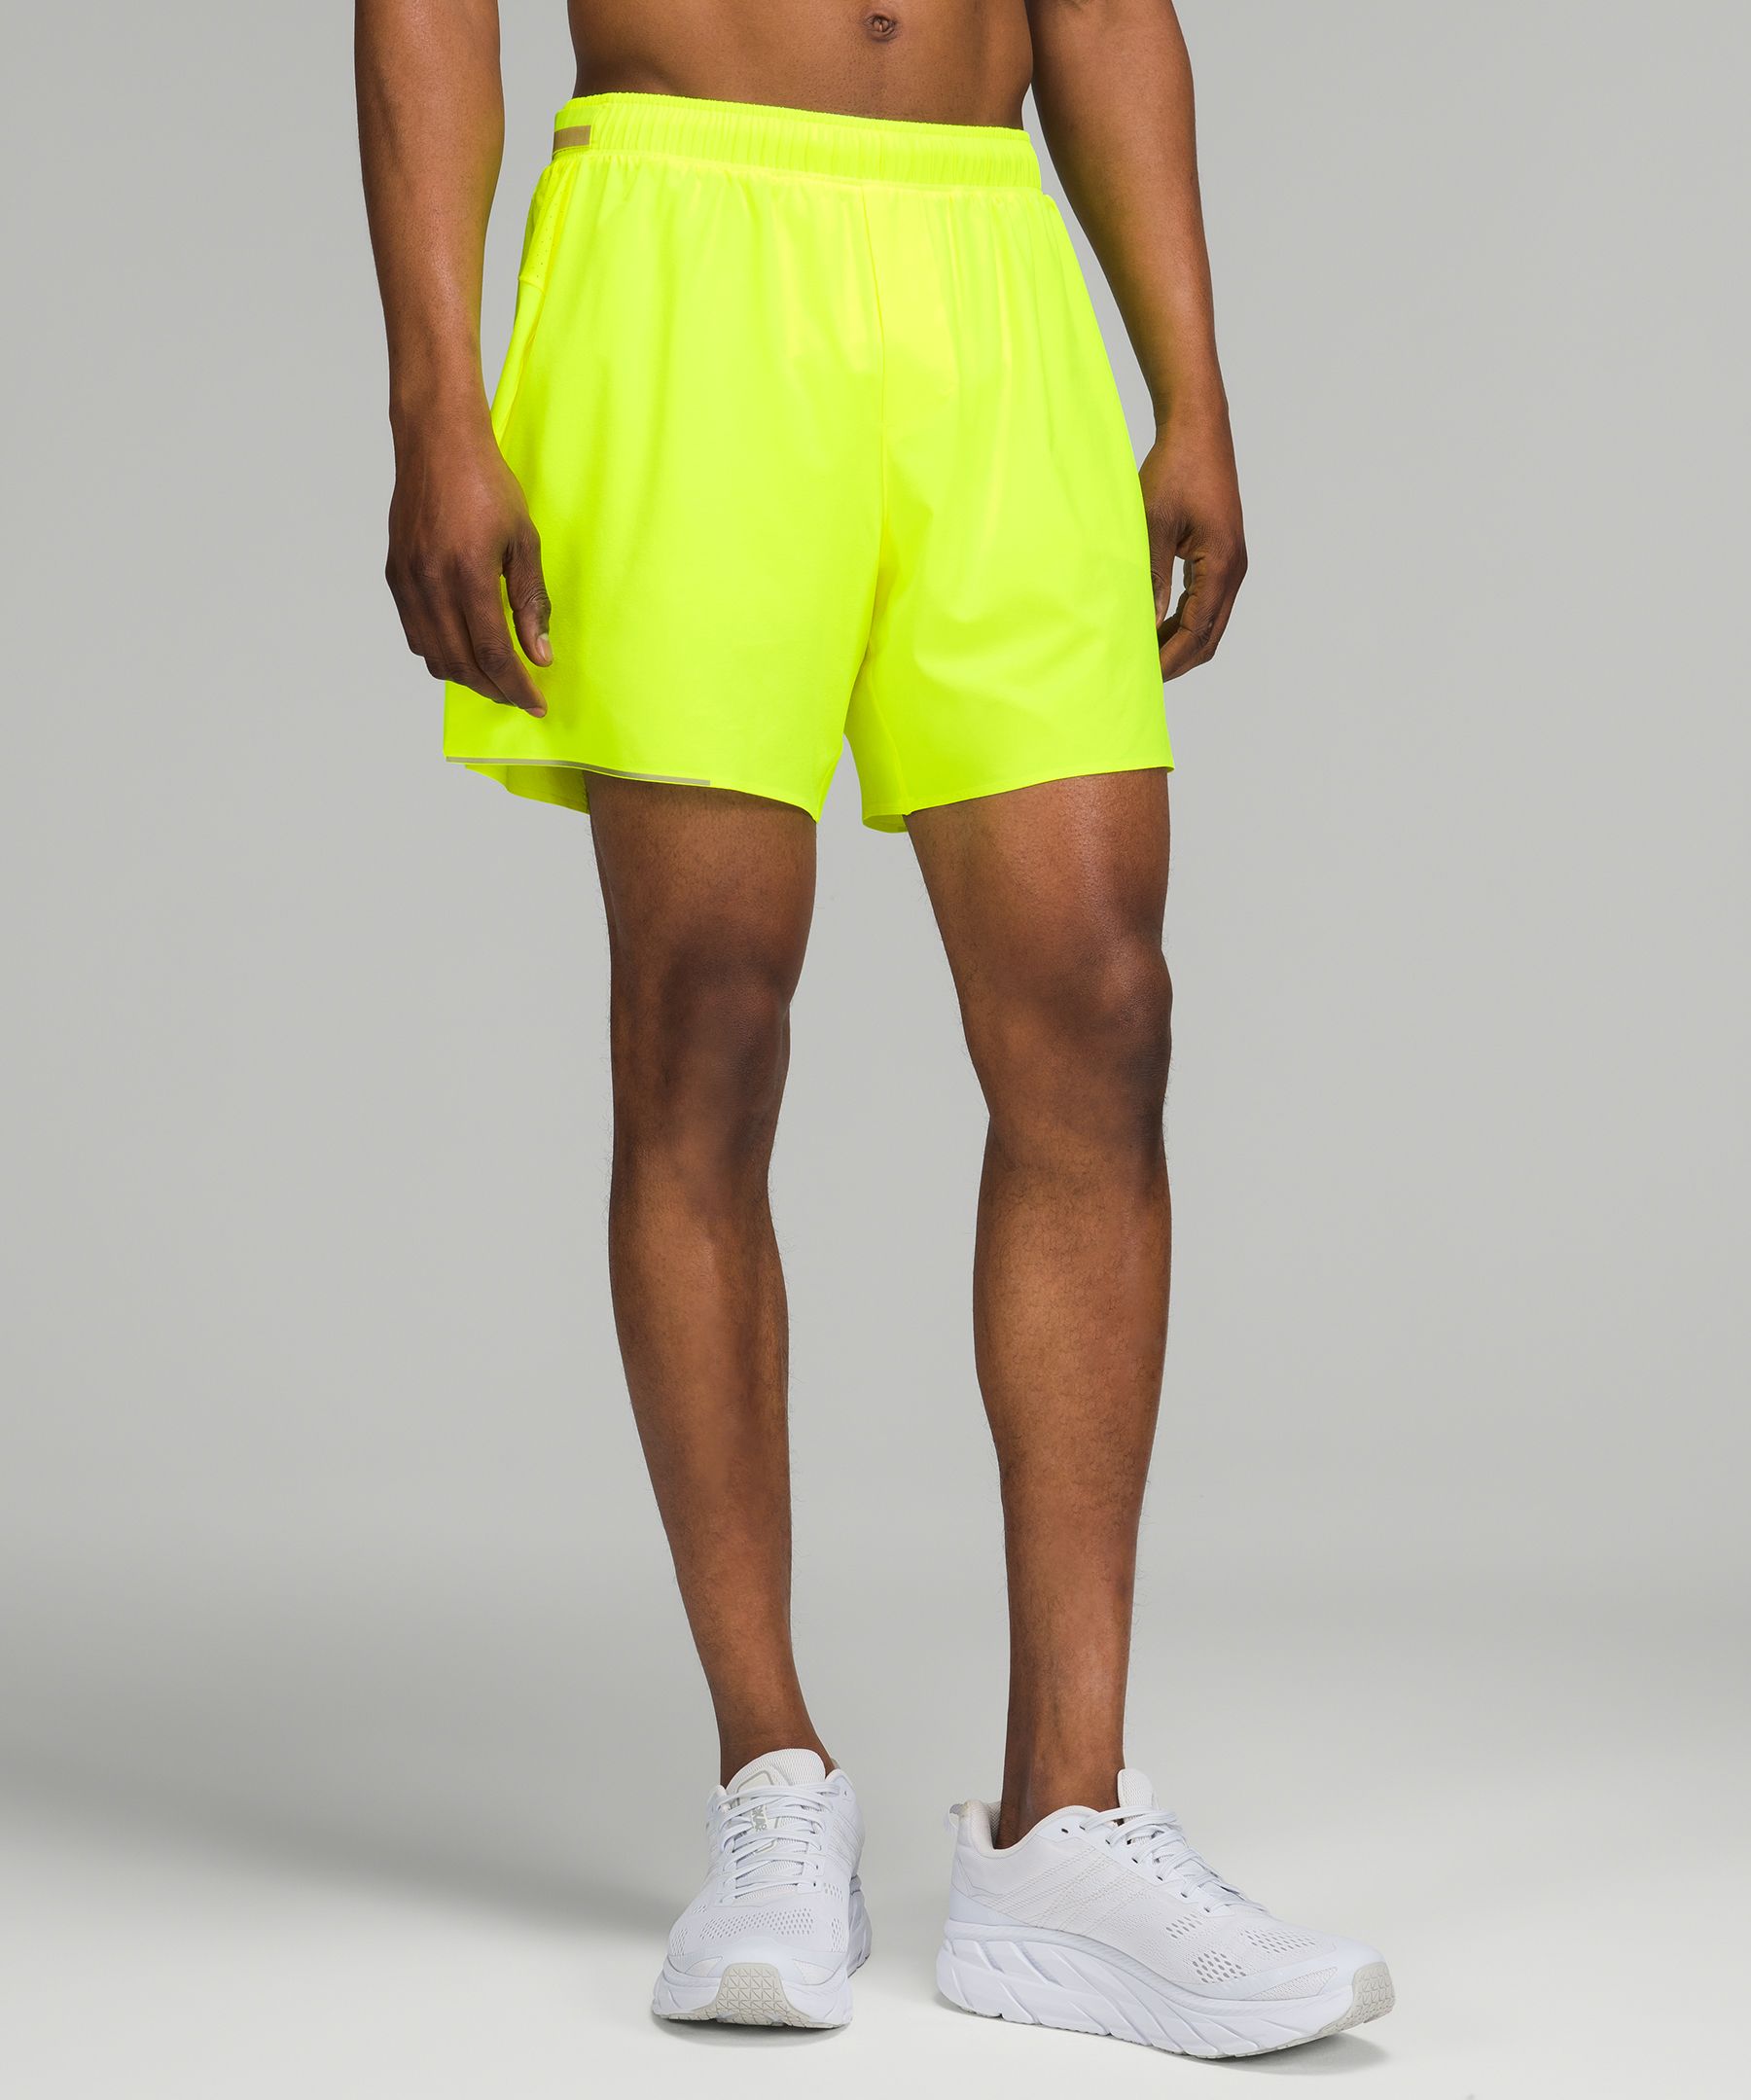 Lululemon Surge Lined Shorts 6" In Highlight Yellow